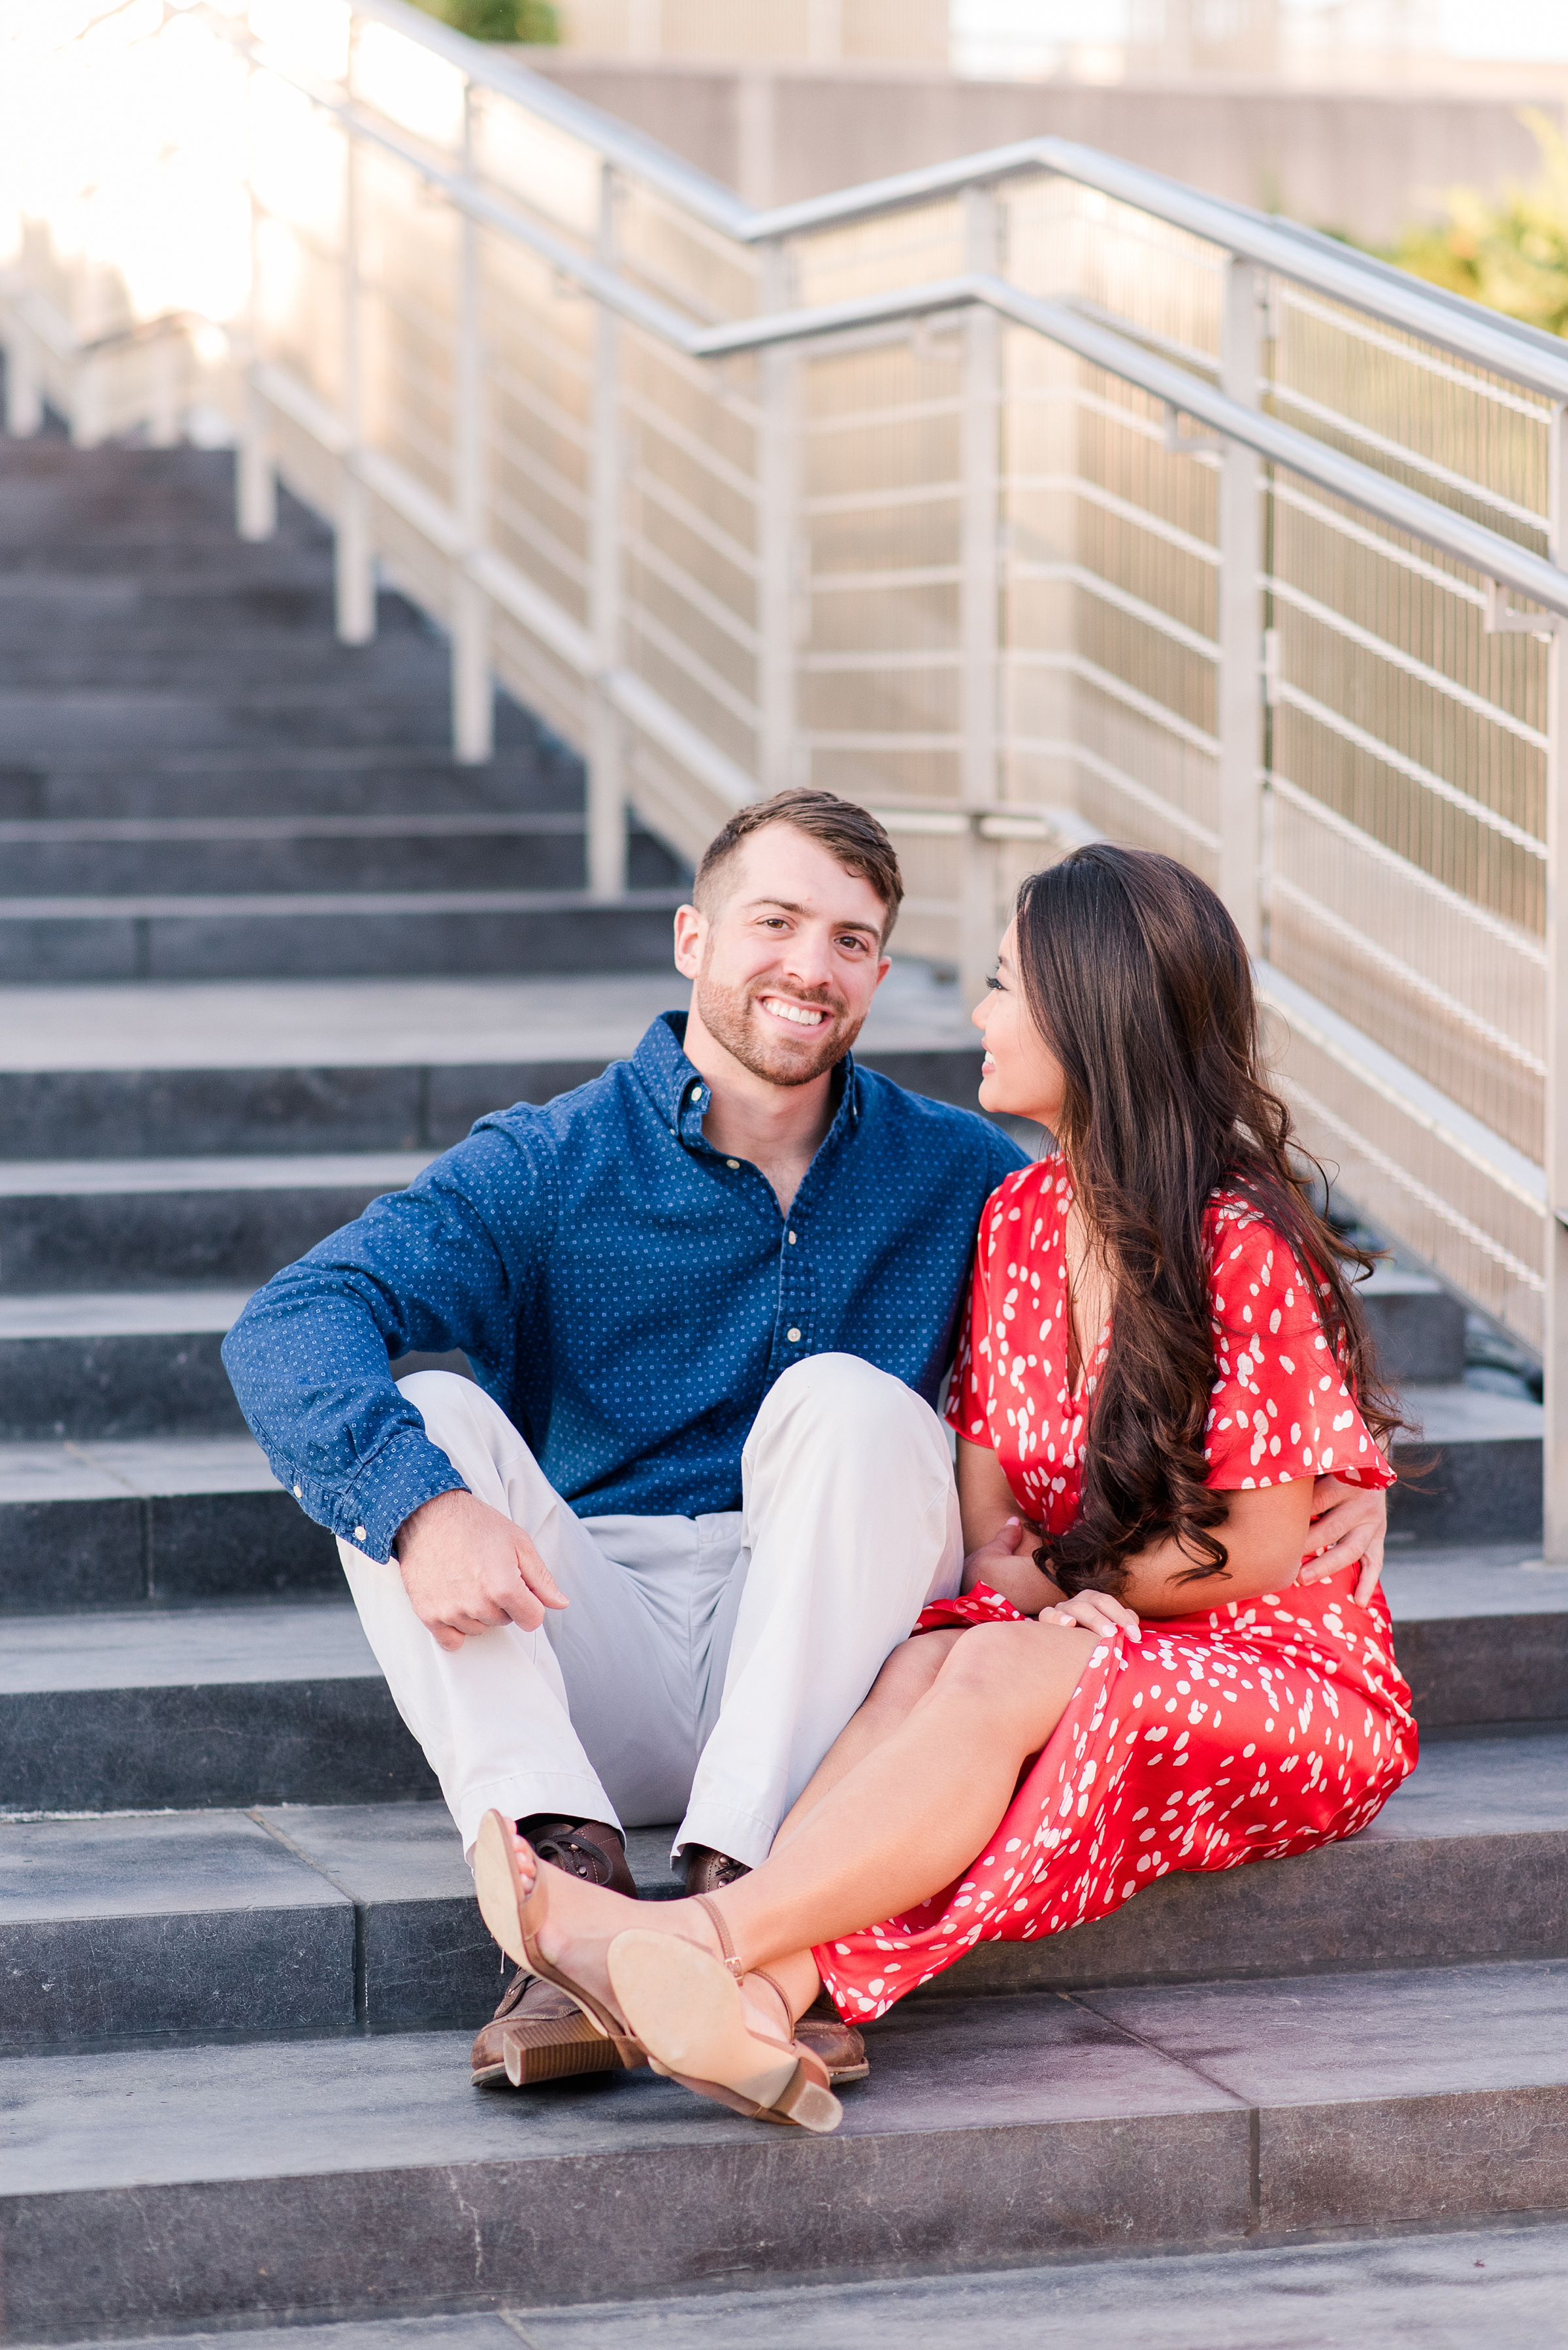 Virginia Museum of Fine Arts Engagement Session | Kailey Brianne Photography